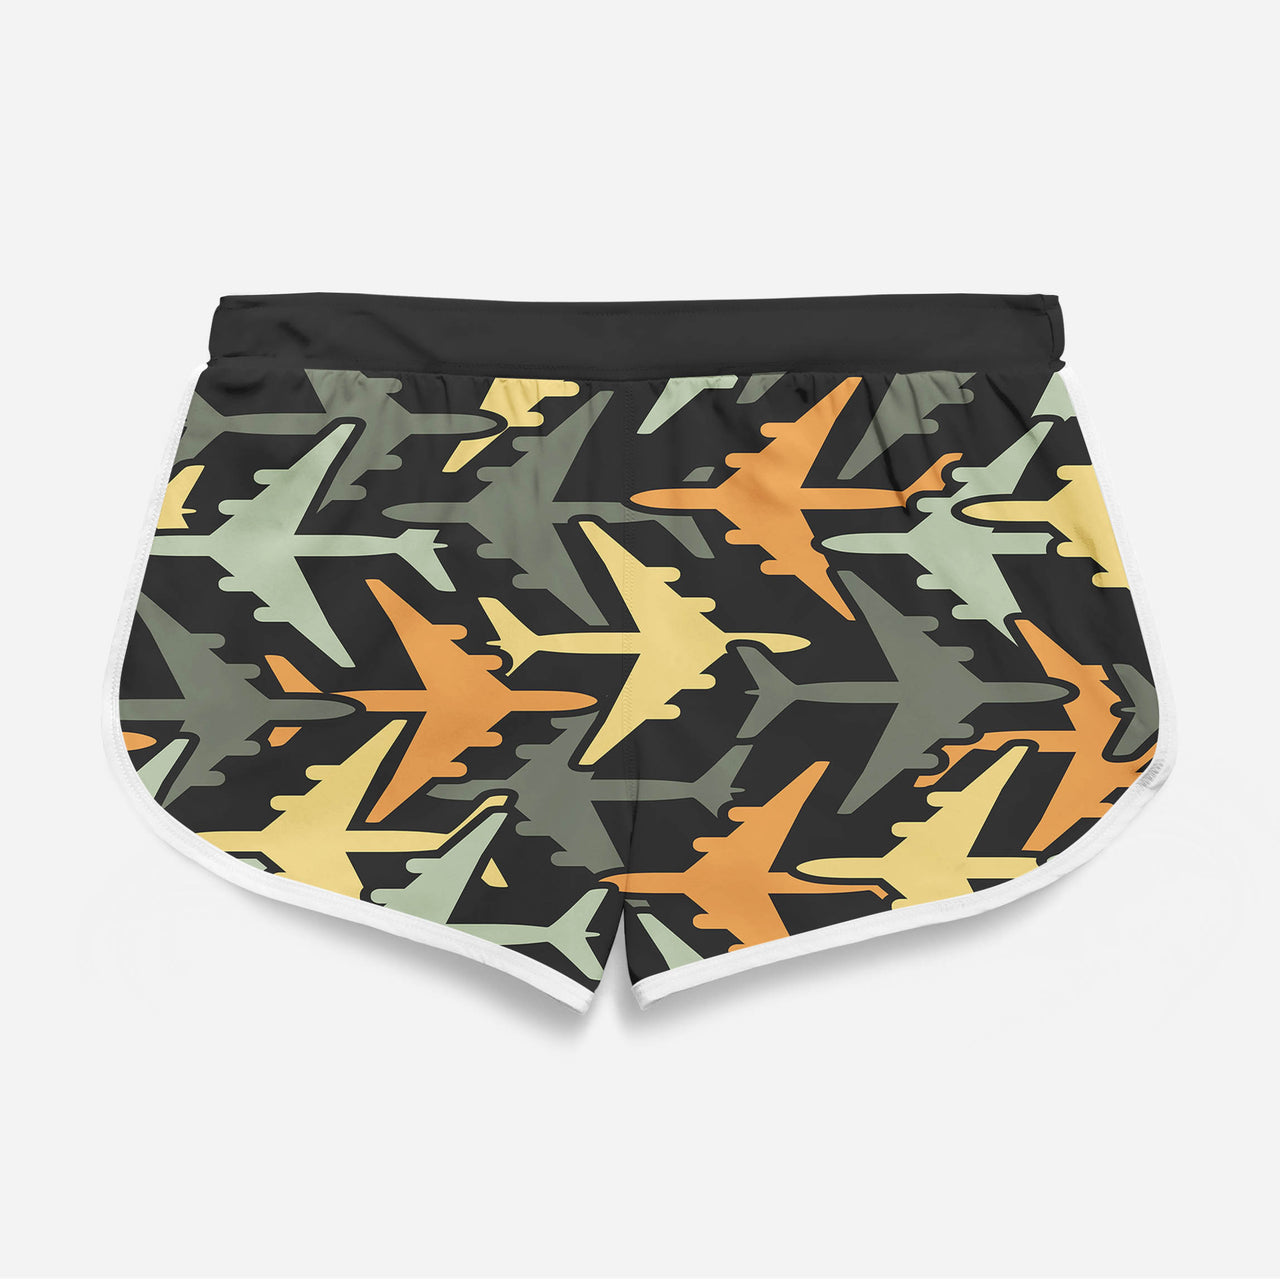 Volume 2 Super Colourful Airplanes Designed Women Beach Style Shorts